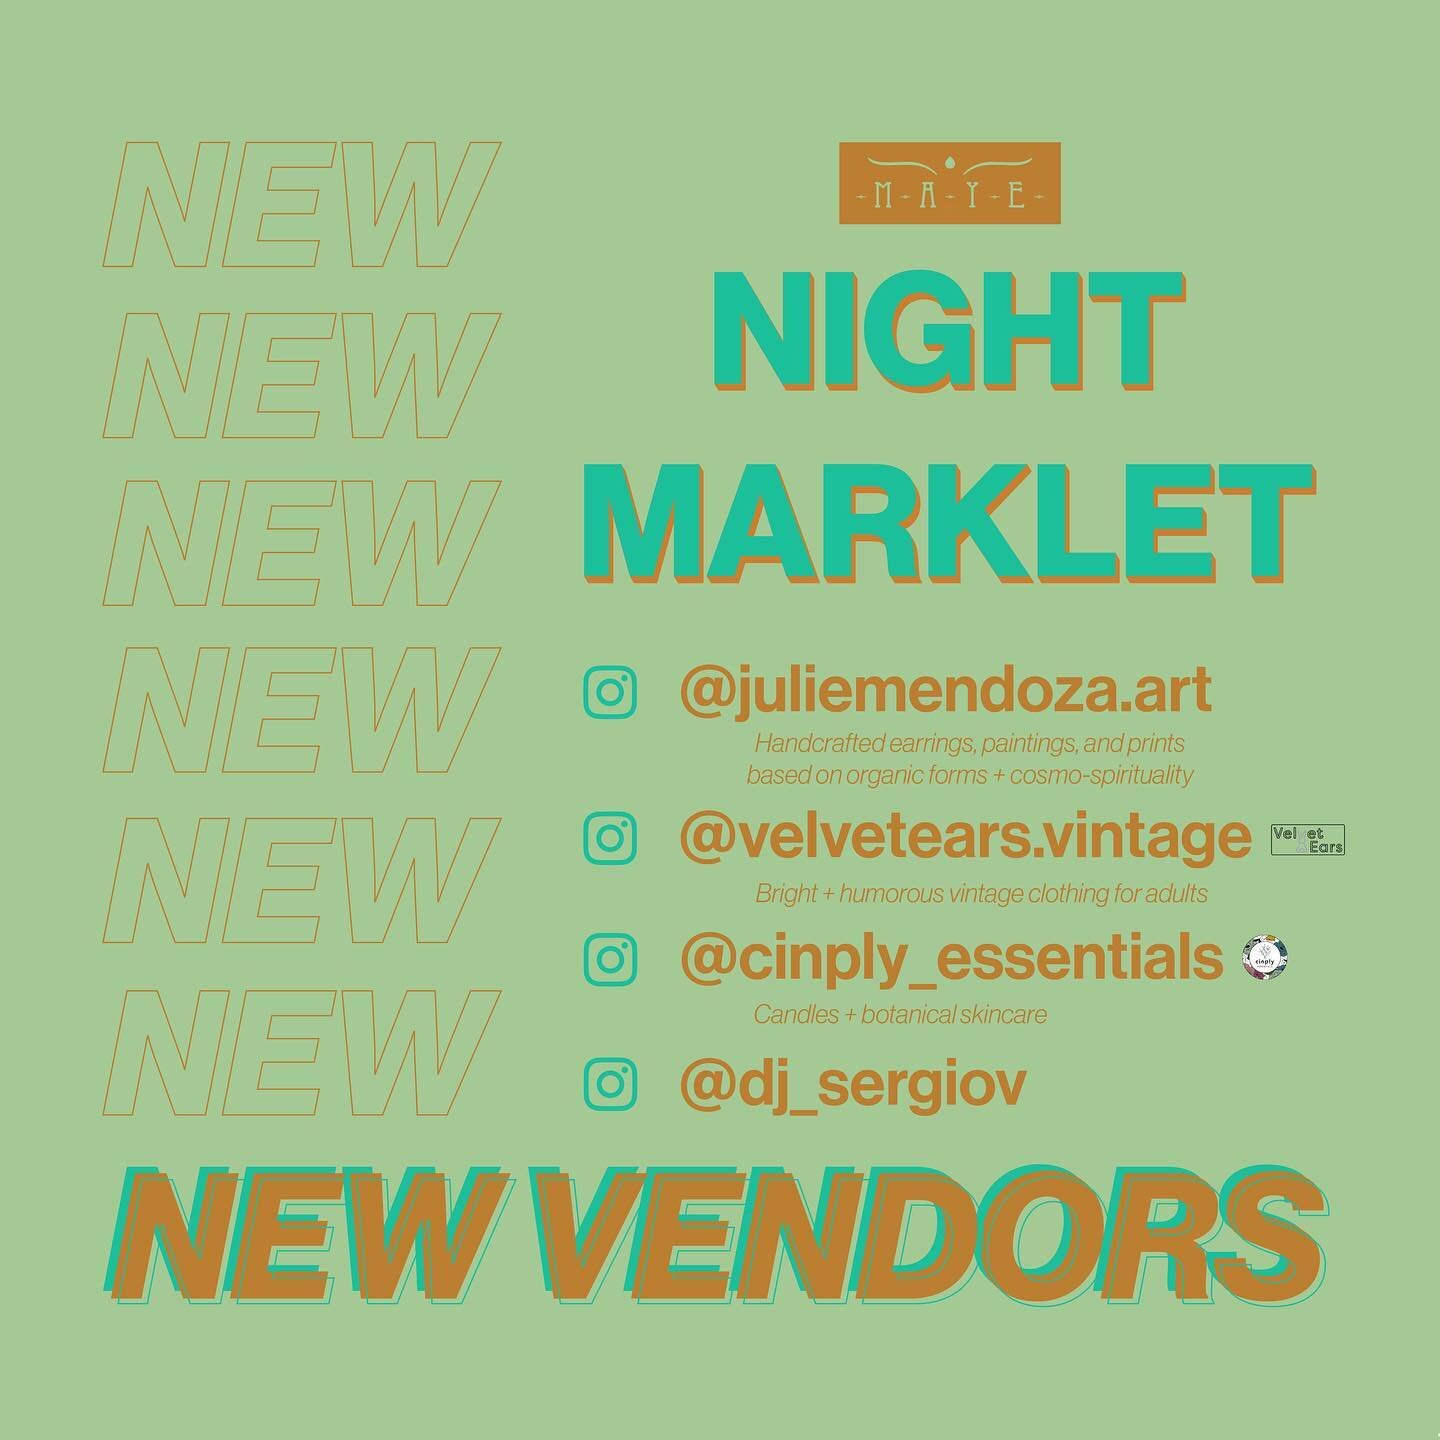 🍾 Check out our 🆕 vendors for the Night Marklet: @juliemendoza.art @velvetears.vintage @cinply_essentials @dj_sergiov!

🗓 Quick reminder that our Night Marklet is this Sunday, July 3rd, from 3-7pm in Cambodia Town at the MAYE Center. Hope to see y